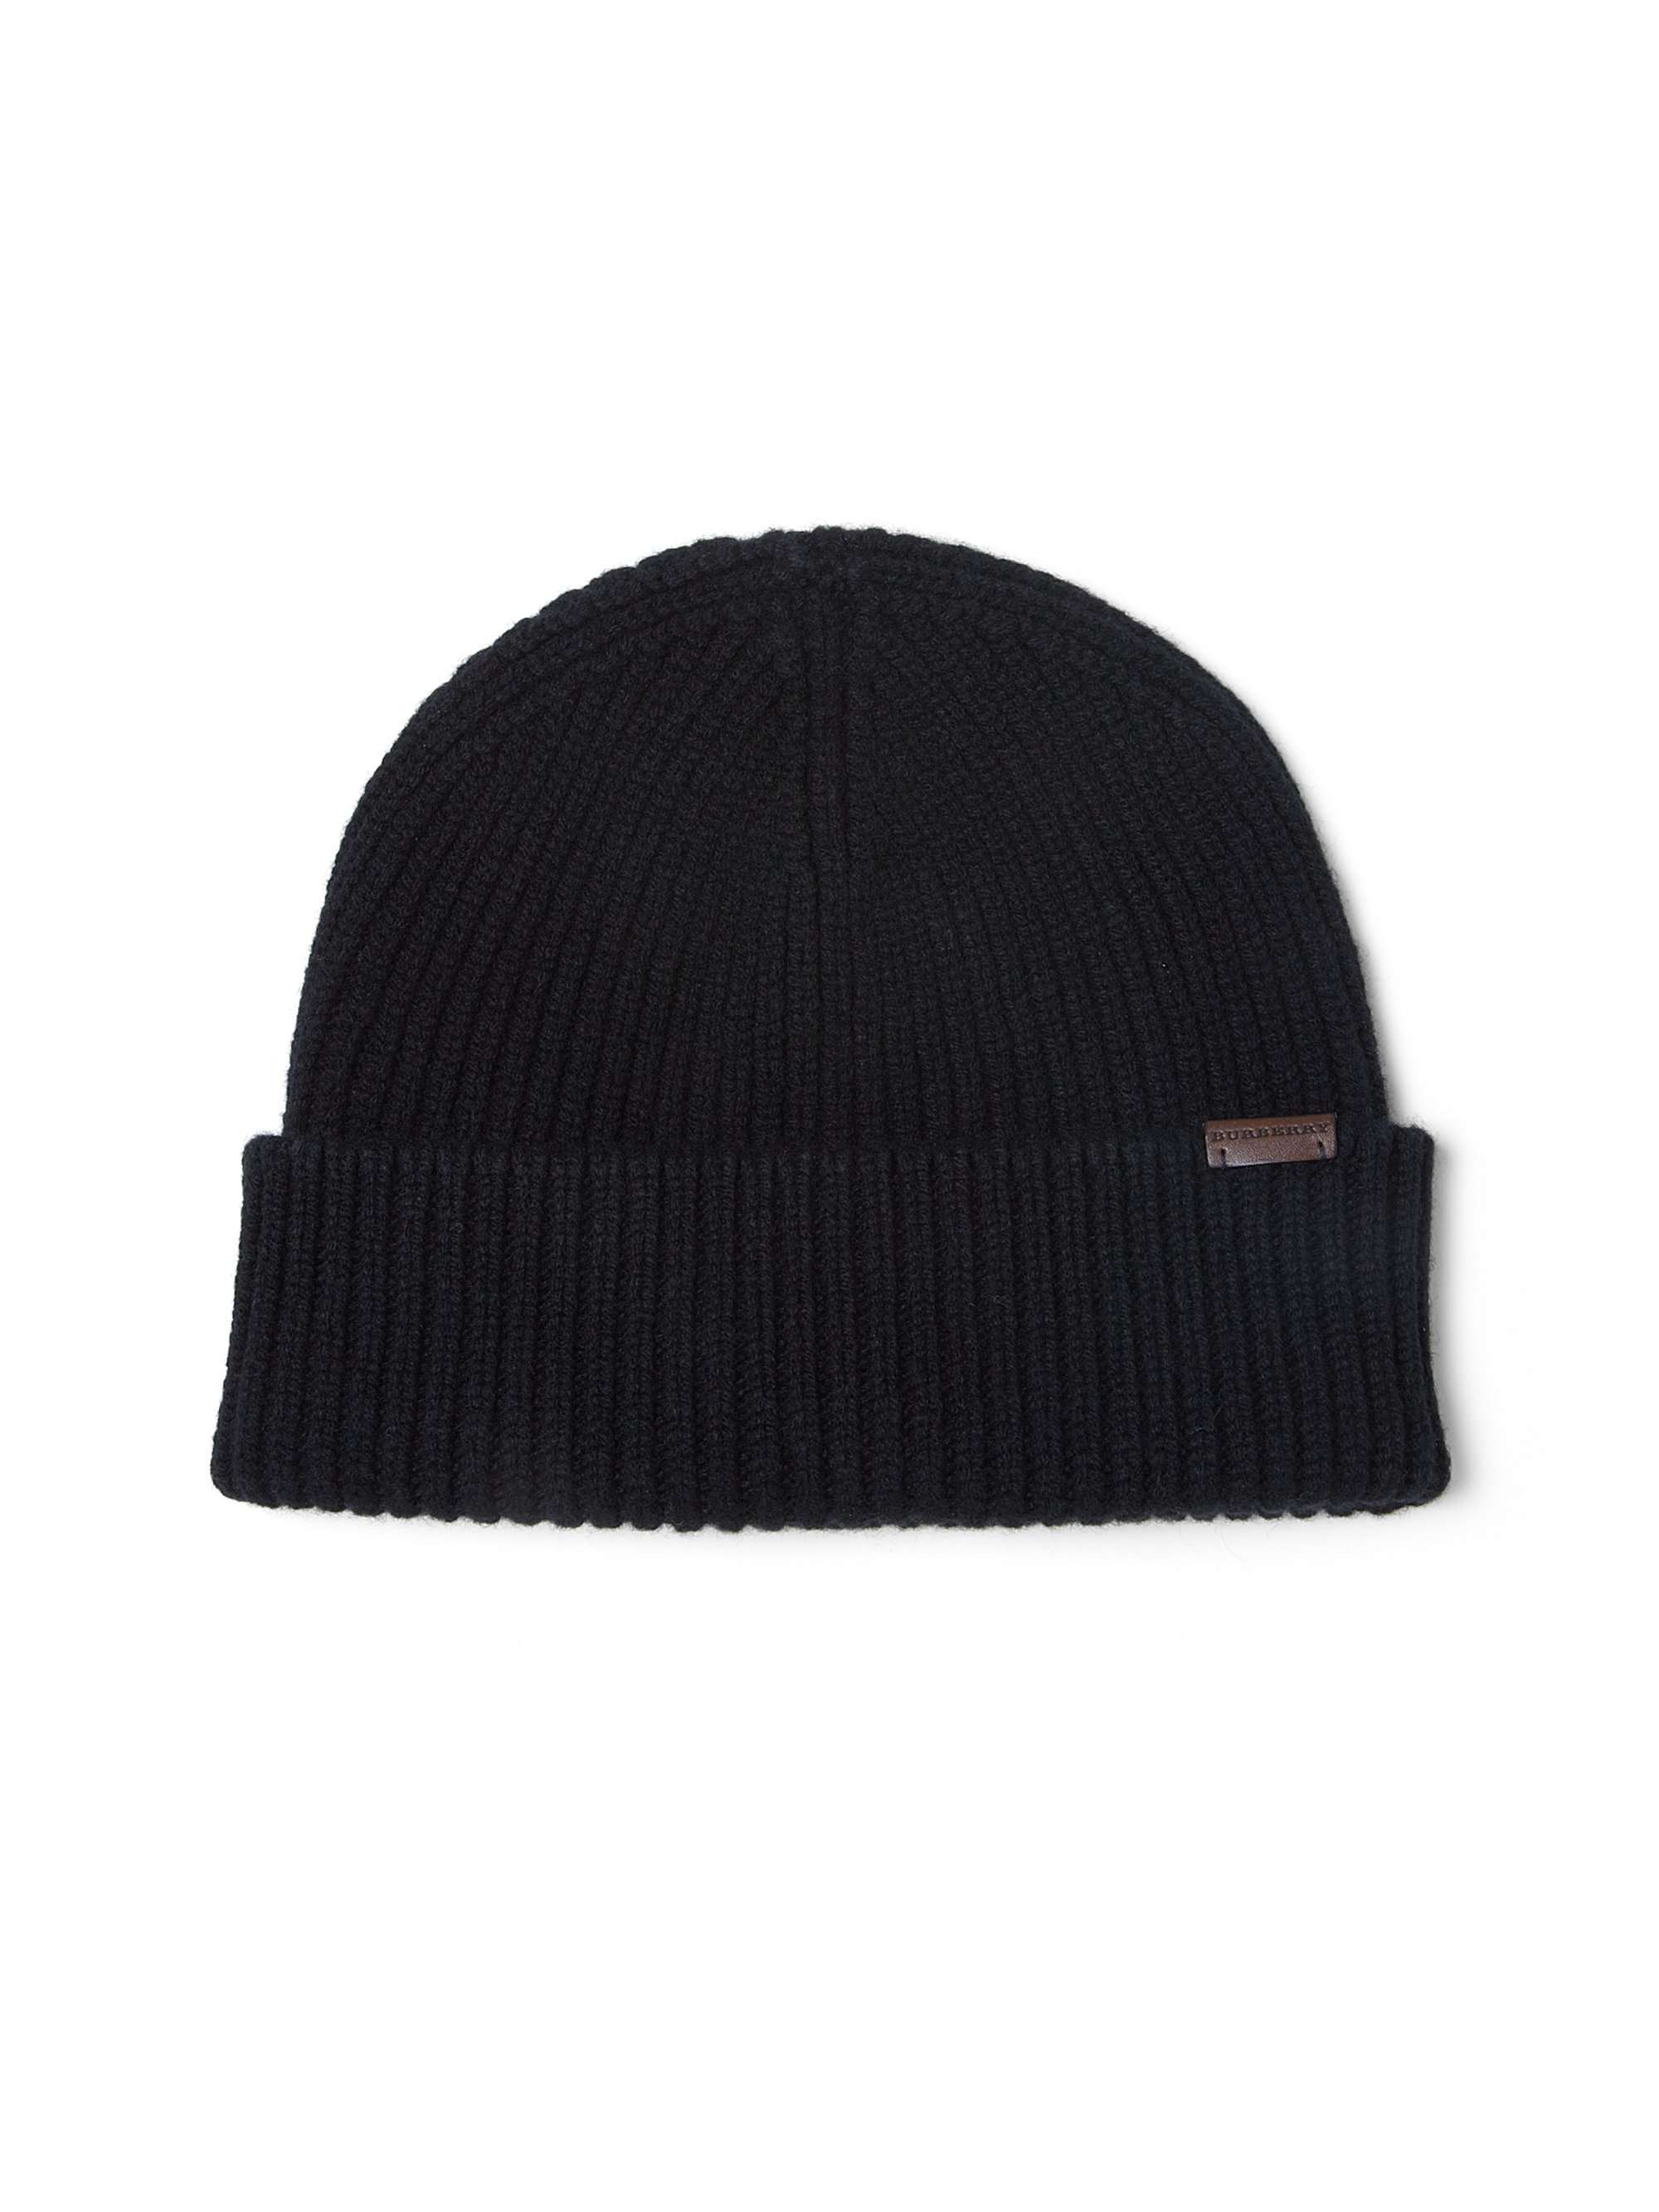 Burberry Wool & Cashmere Beanie Hat in Black for Men | Lyst